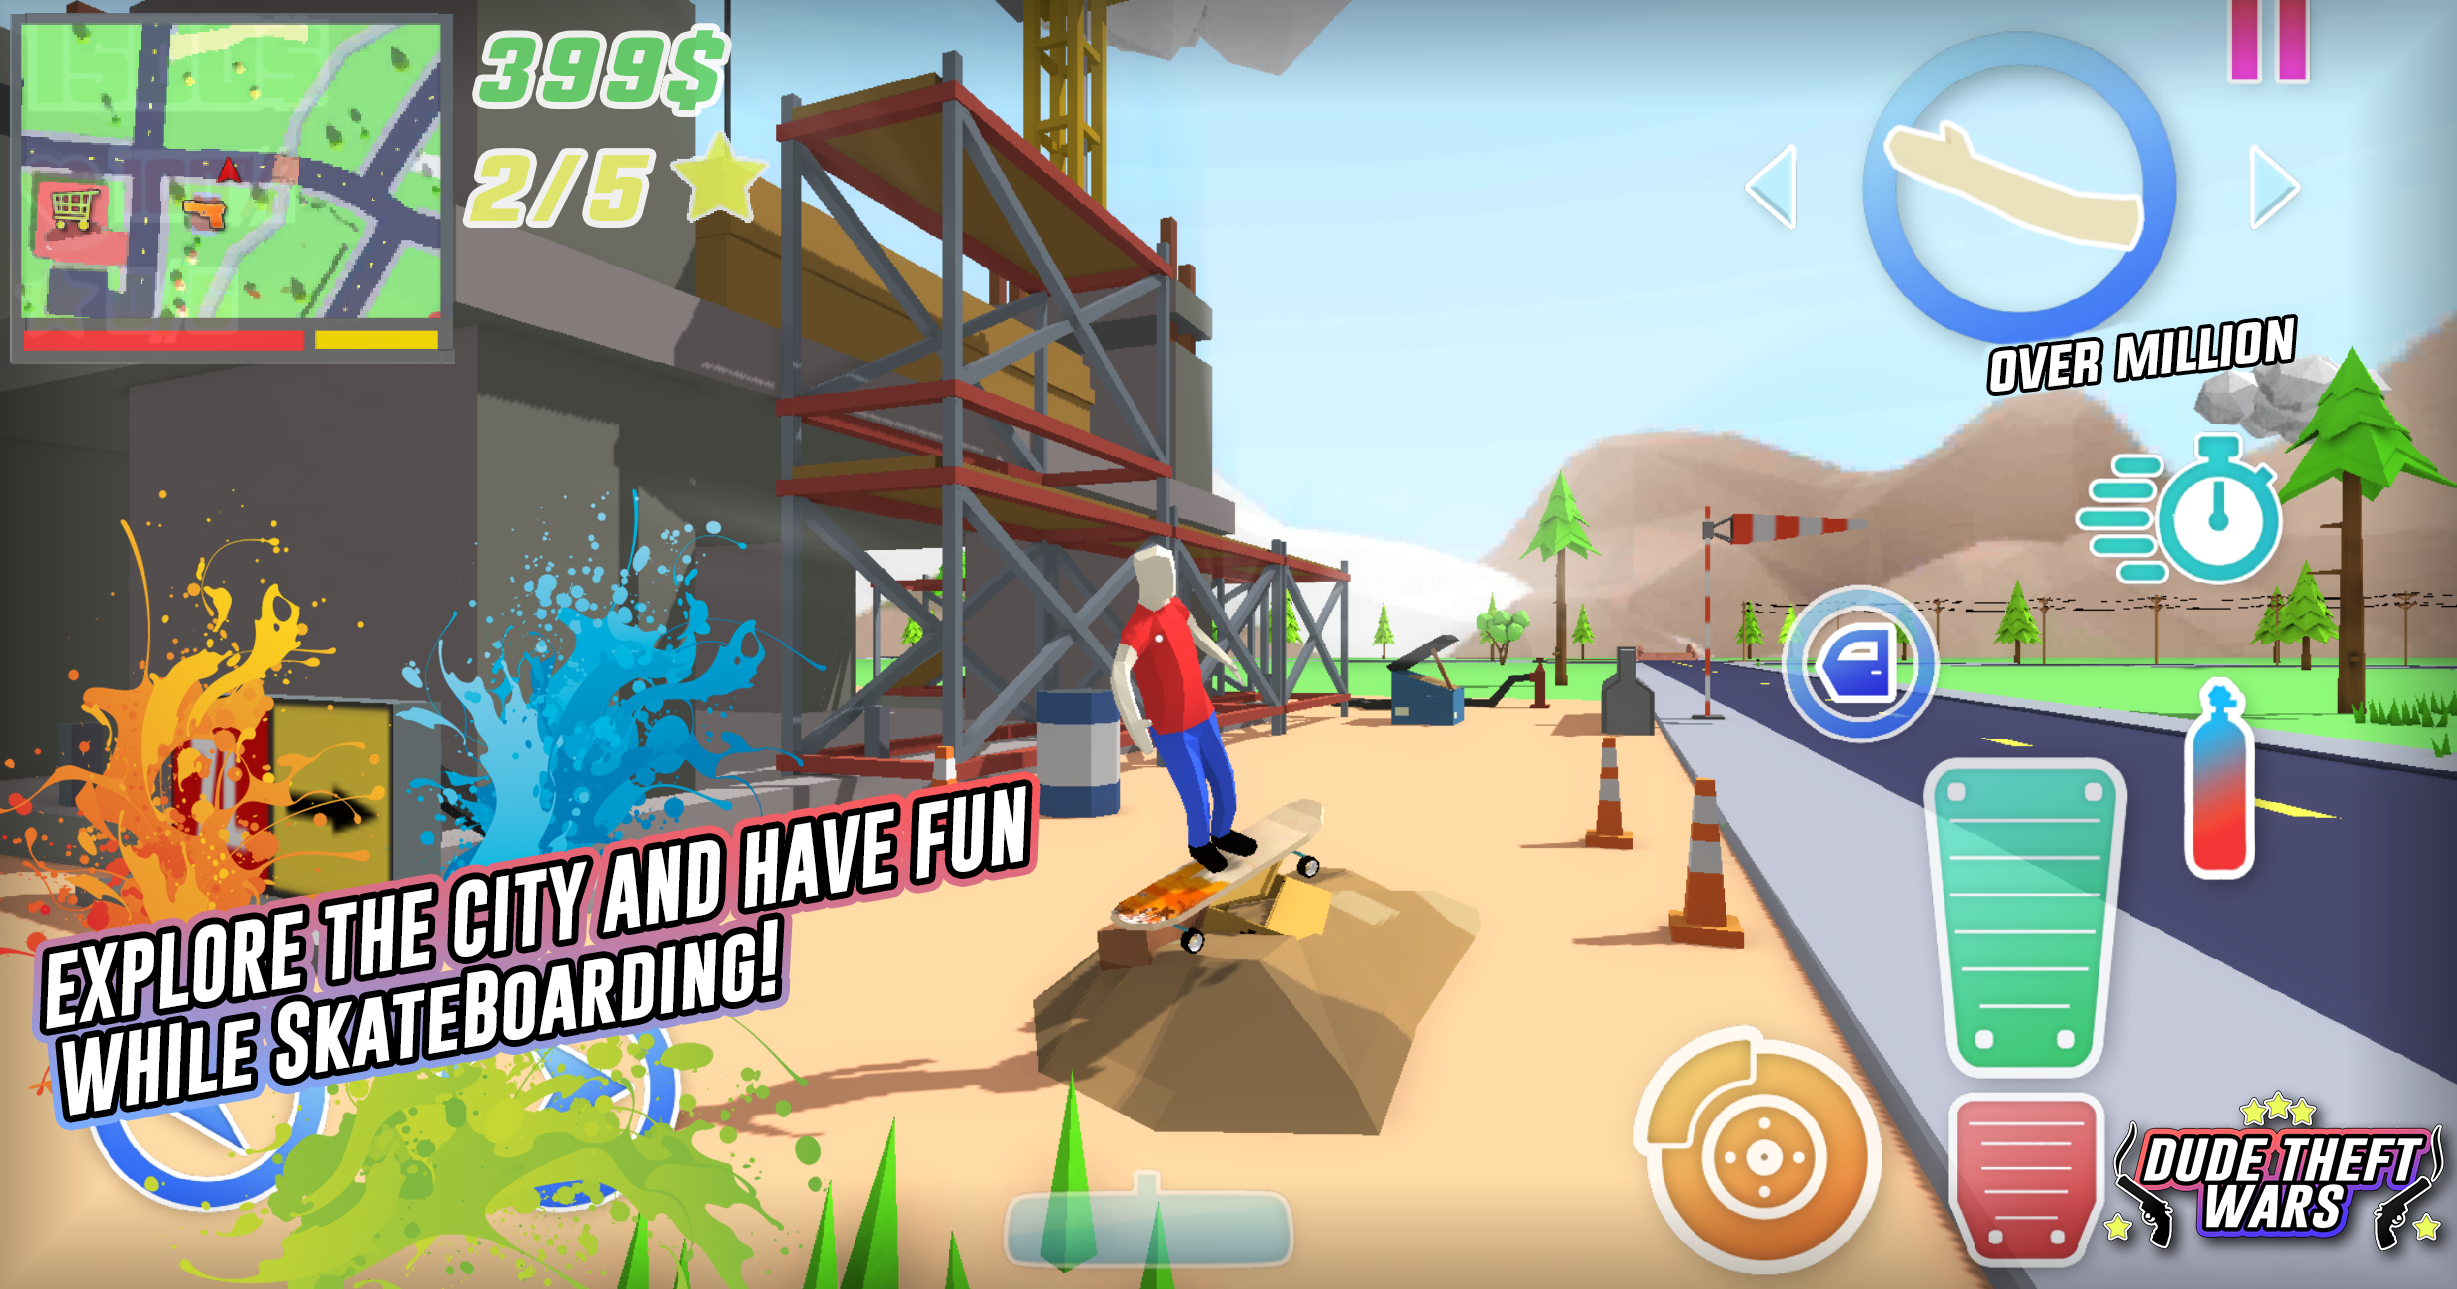 Dude Theft Wars for Android - APK Download - 